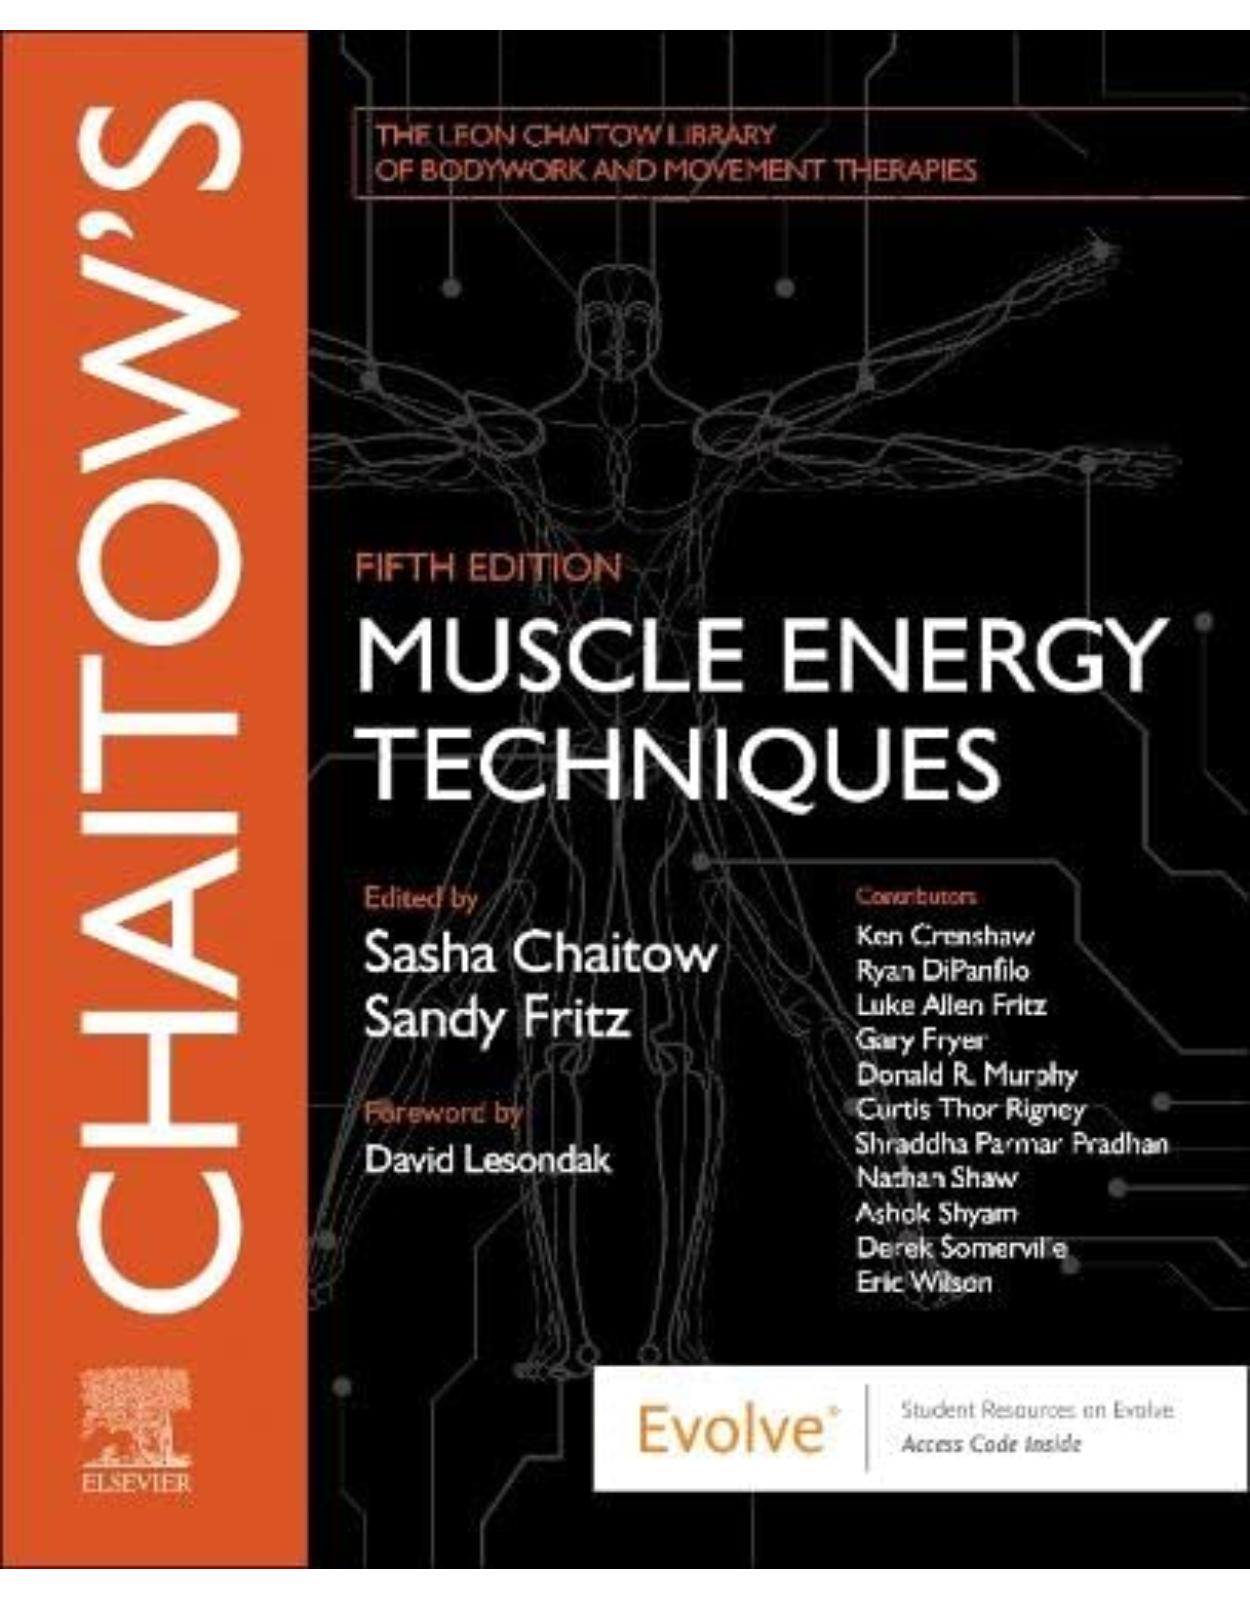 Chaitow’s Muscle Energy Techniques